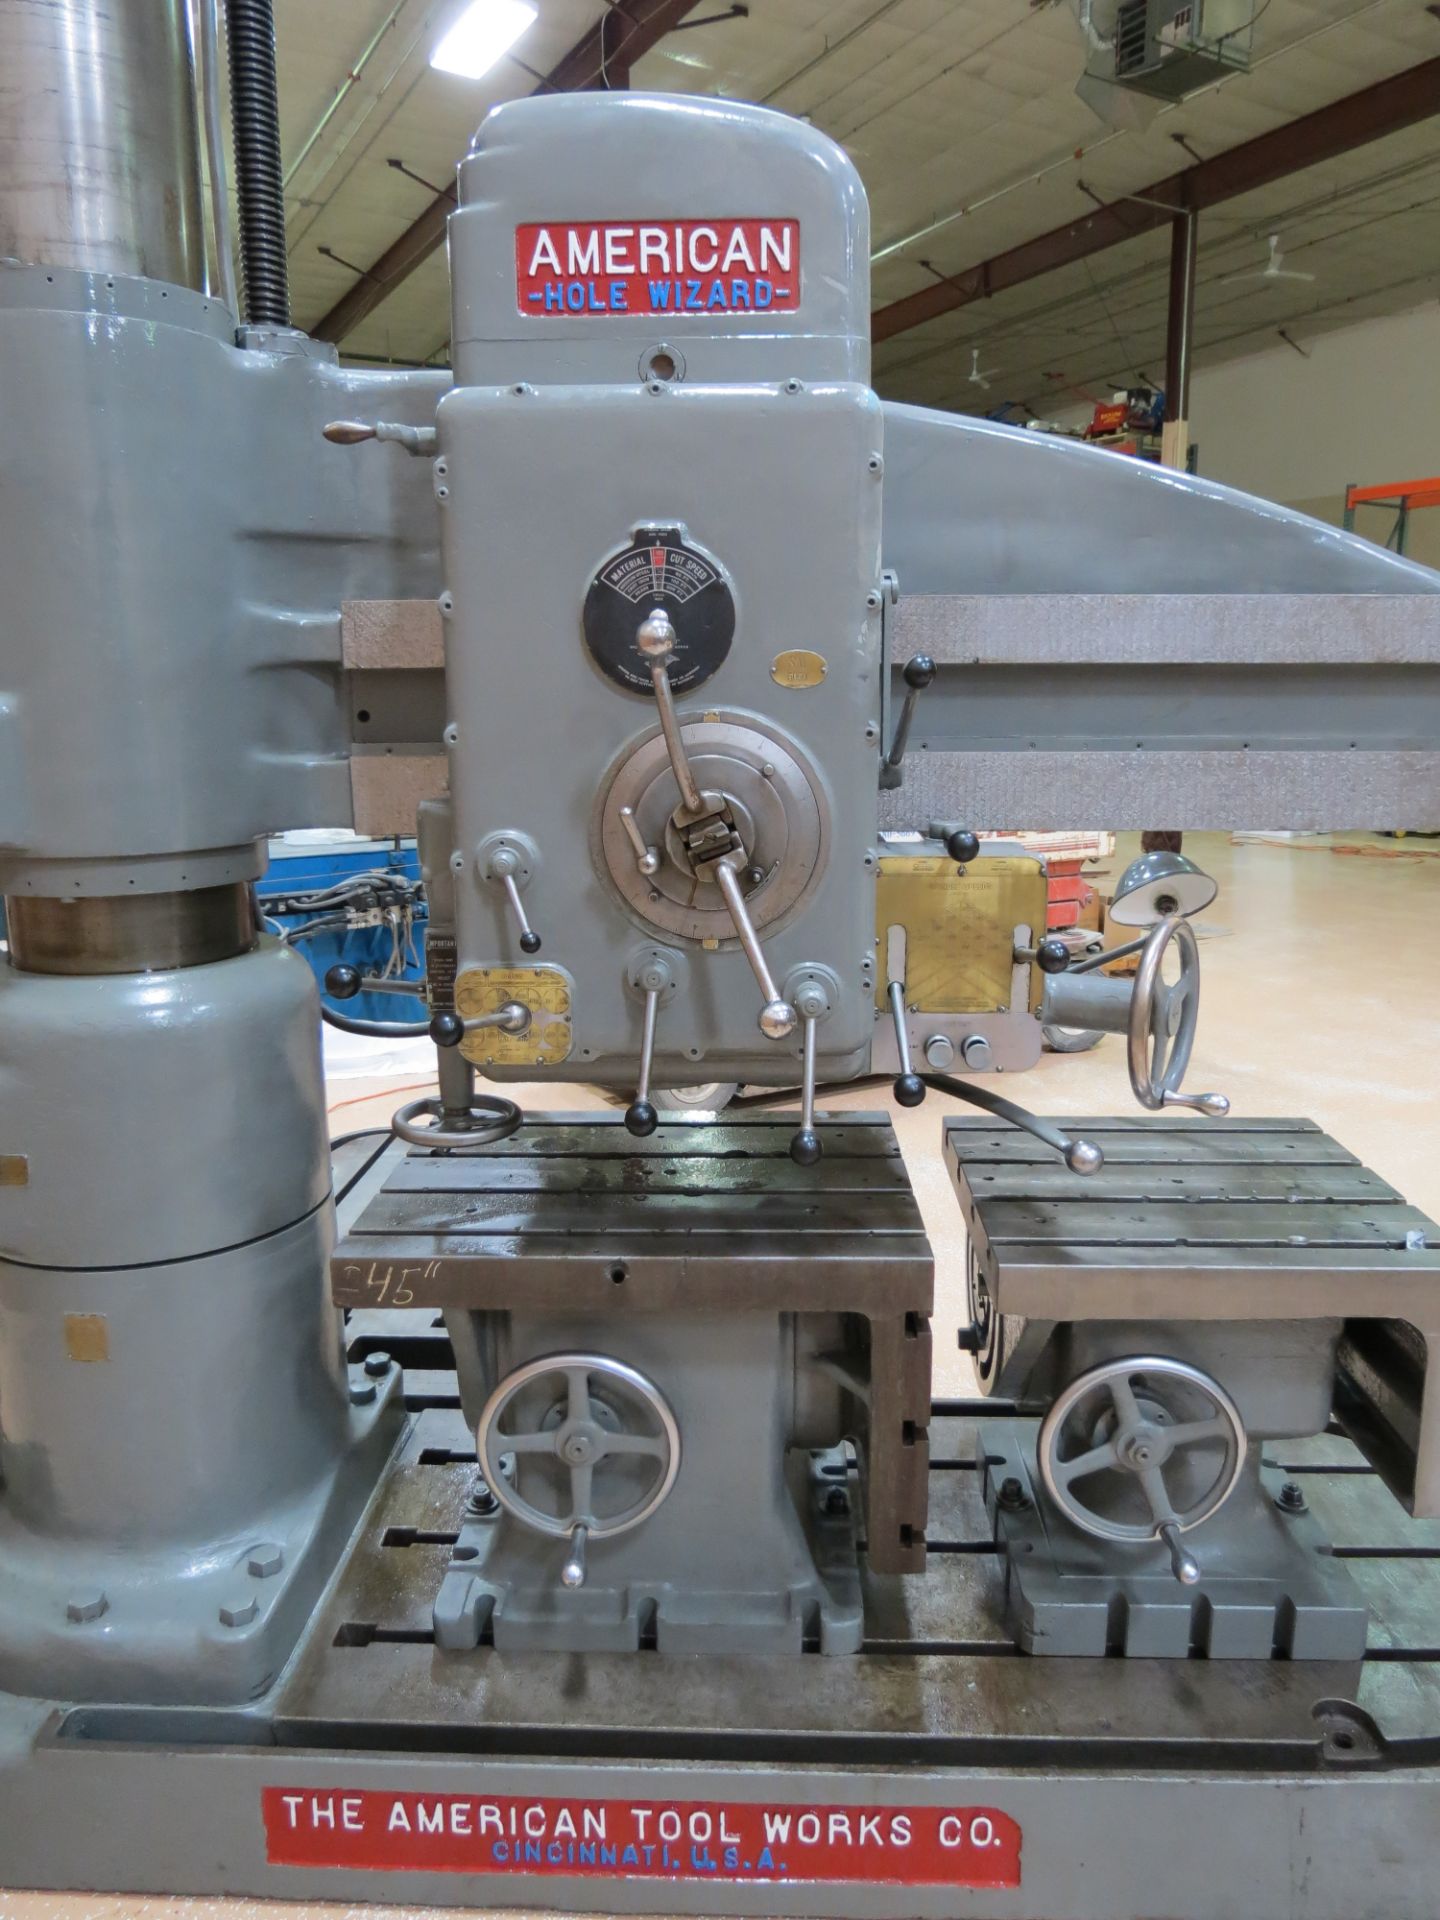 5' X 13" AMERICAN HOLE WIZARD RADIAL ARM DRILL - Image 5 of 9